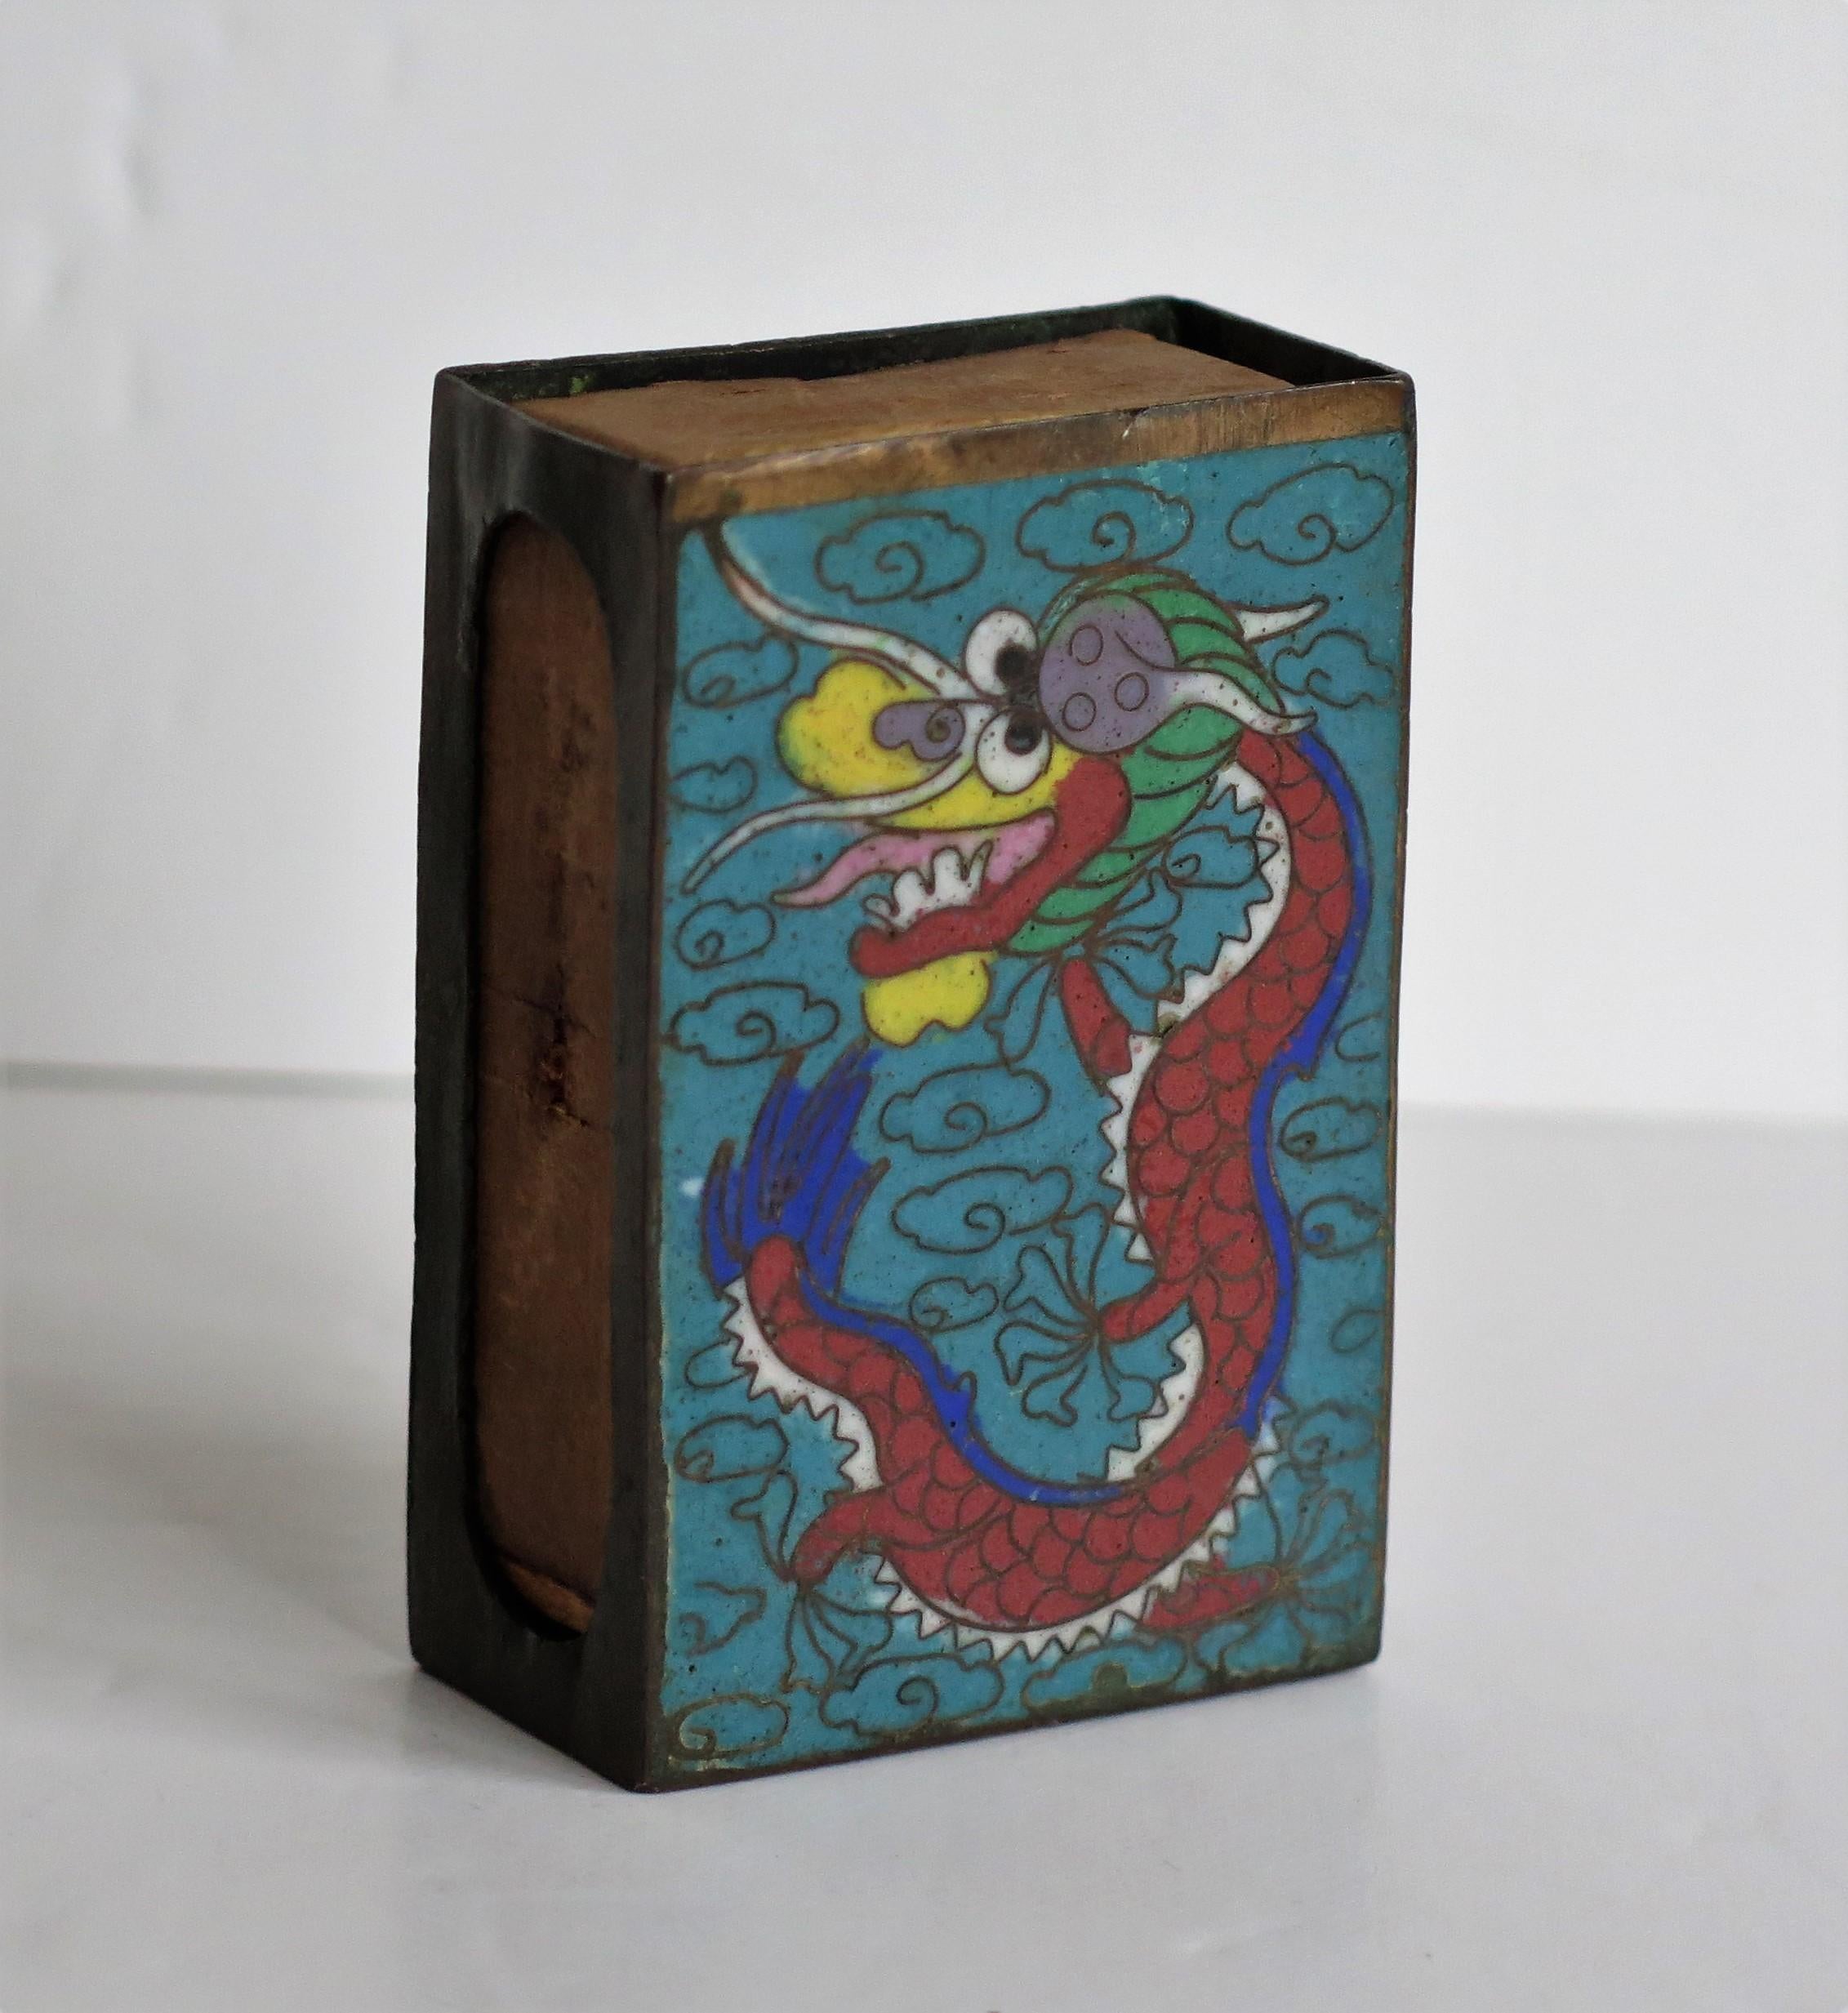 Qing Chinese Cloisonne Vesta Match Case with Dragon and Pearl design, 19th Century